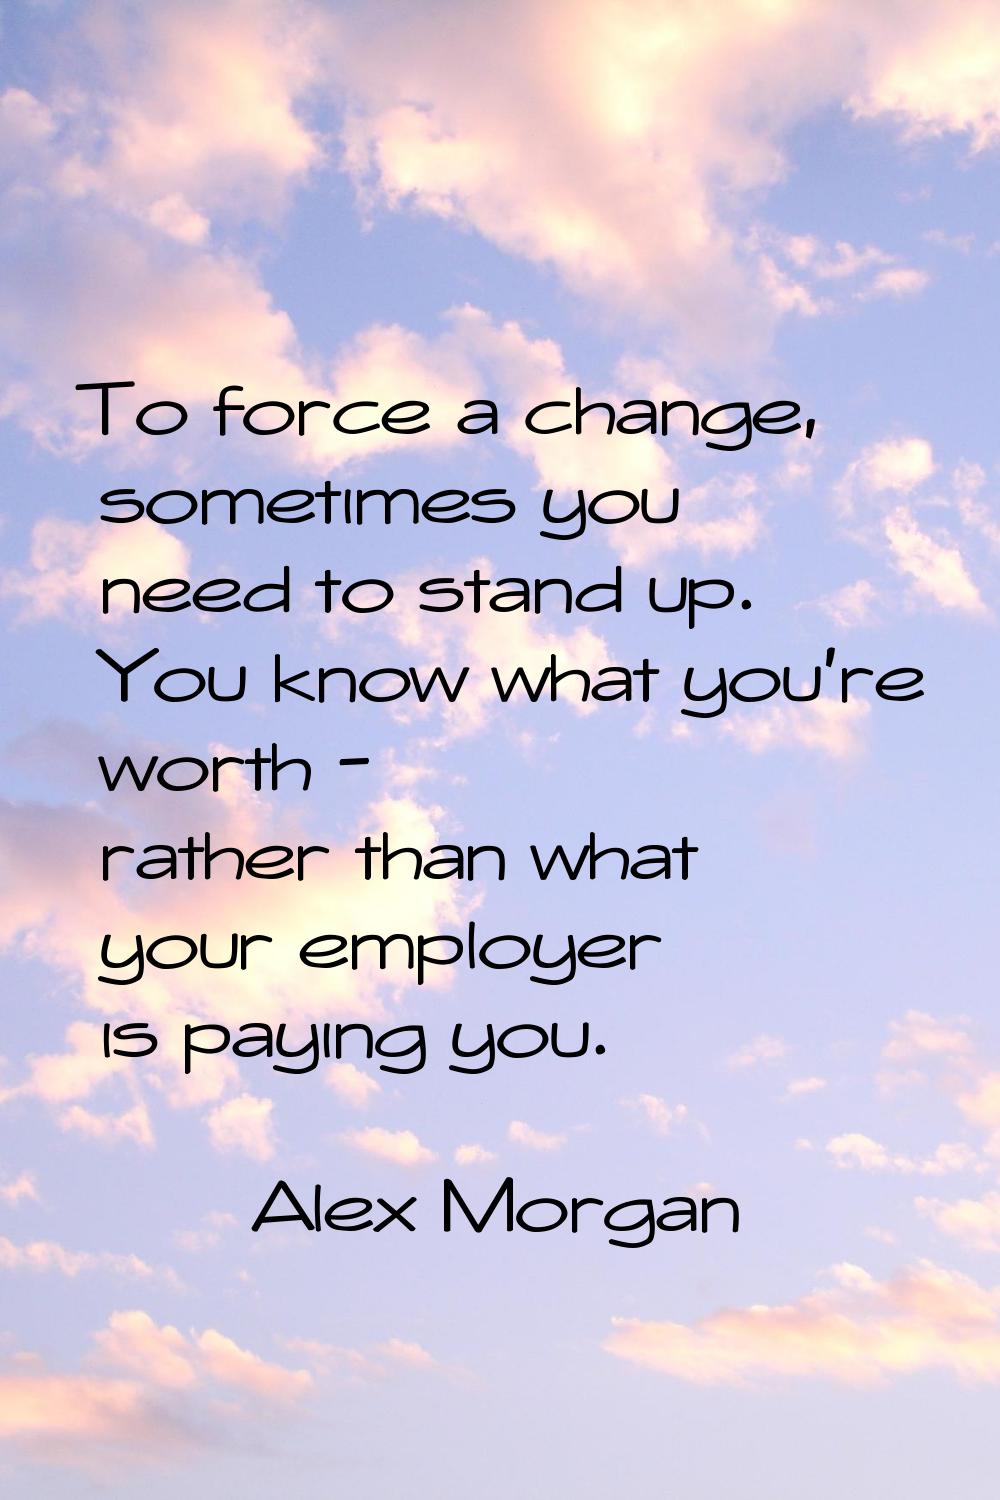 To force a change, sometimes you need to stand up. You know what you're worth - rather than what yo